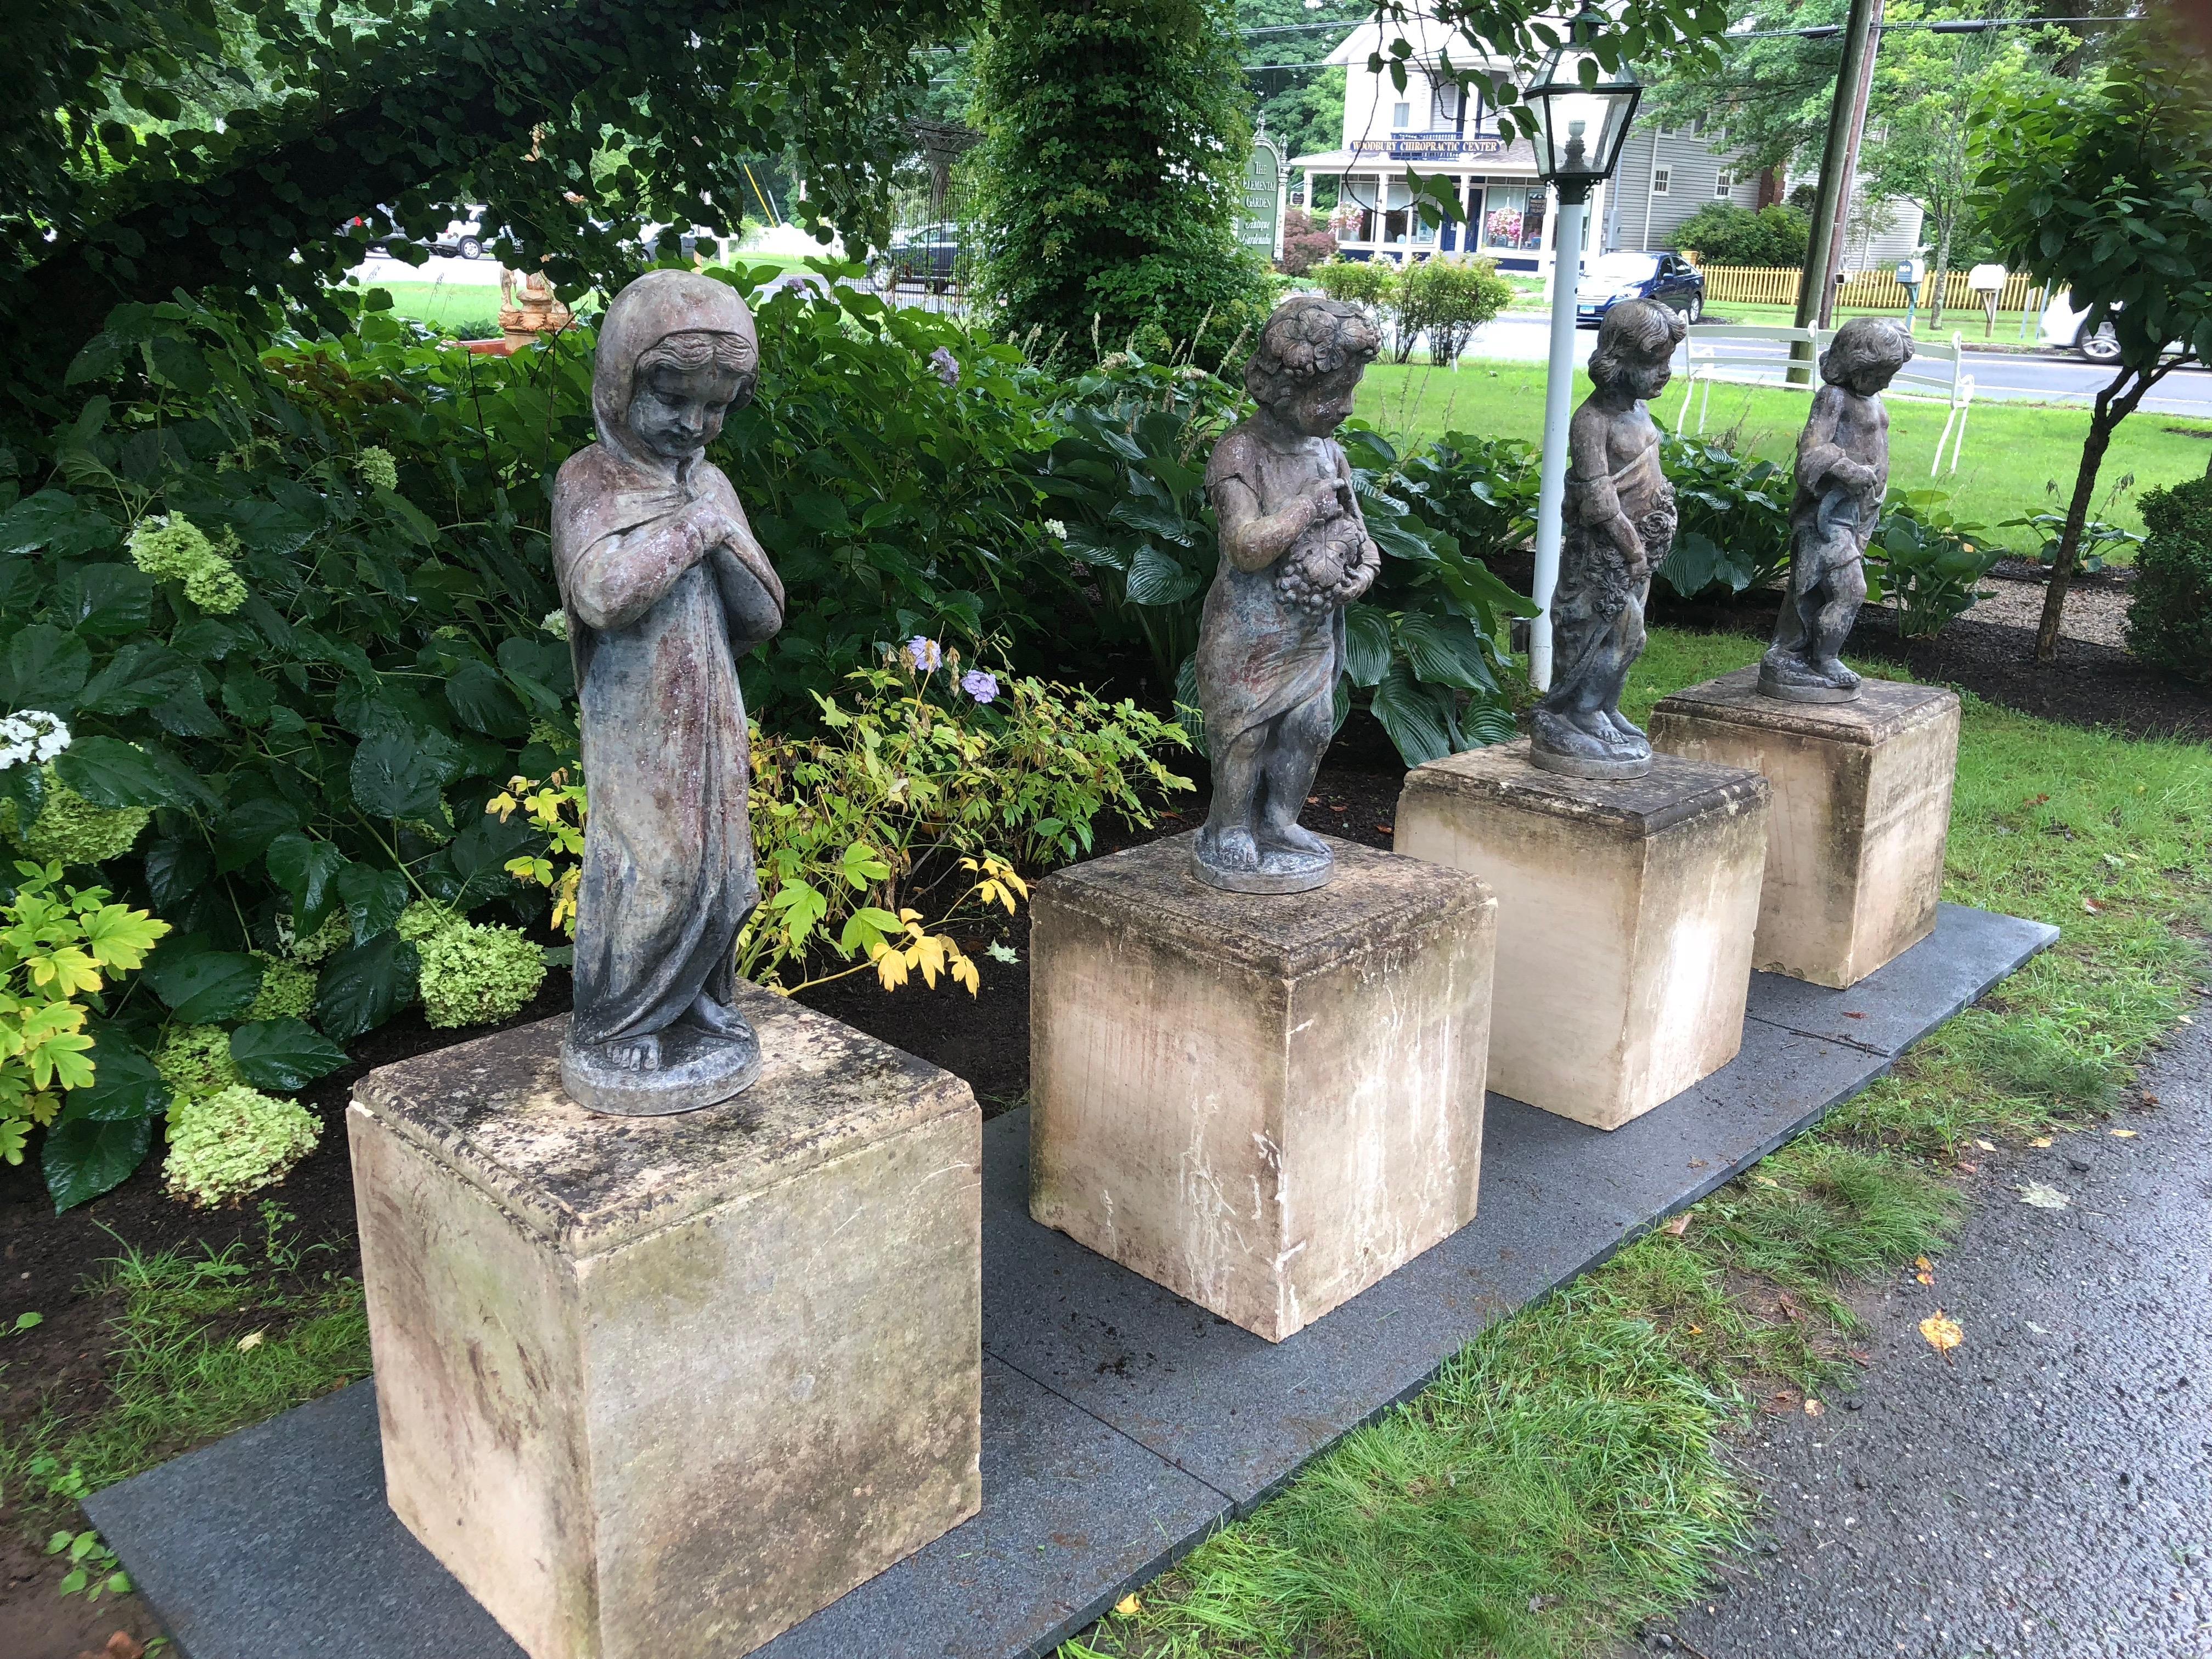 A spectacular set of four lead figures, each representing a different season, are raised up on large plinth blocks of limestone with a beveled top edge. From Oprah Winfrey's personal collection, where they once graced her Montecito estate, they